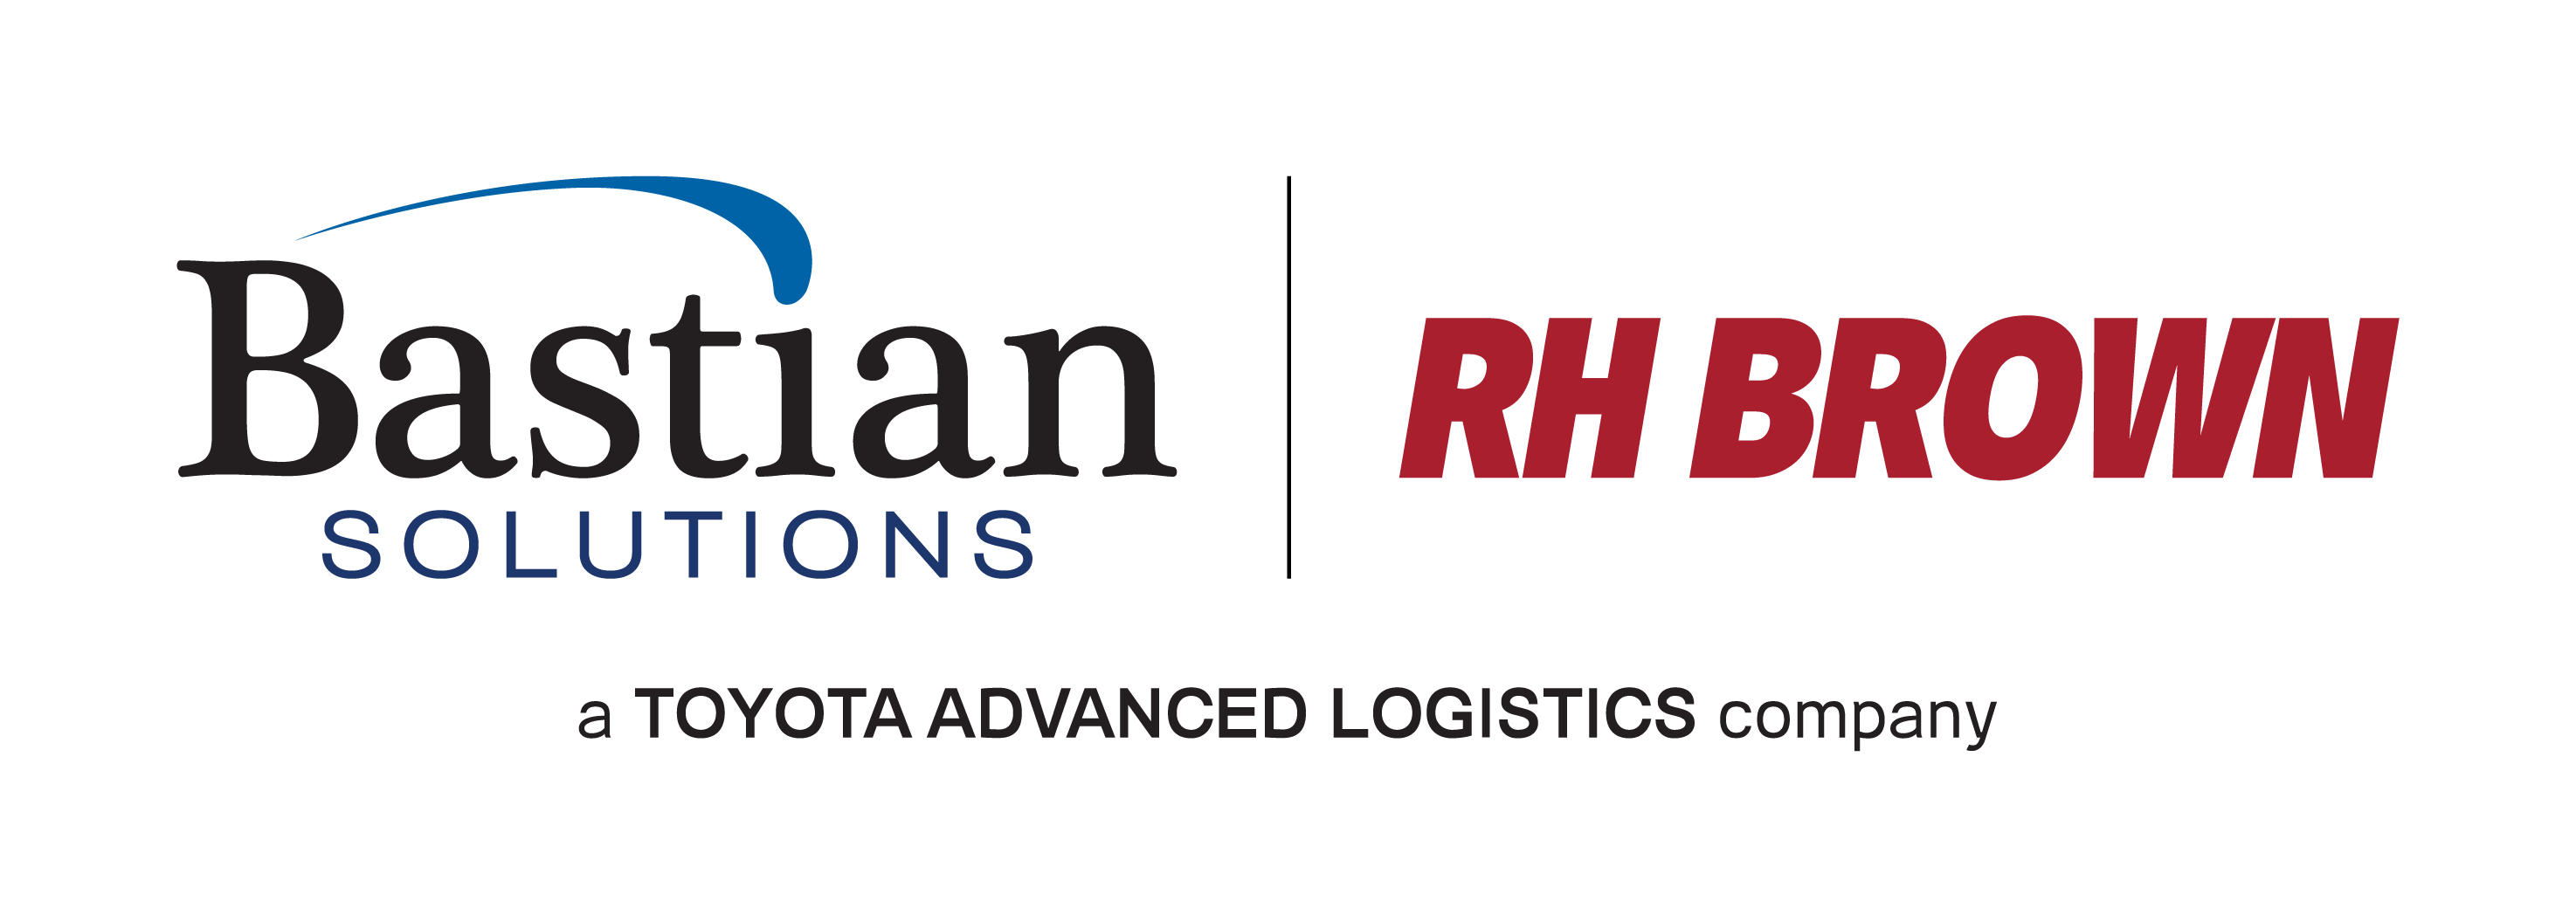 Logo showing Bastian Solutions and RH Brown with text underneath reading A Toyota Advanced Logistics company